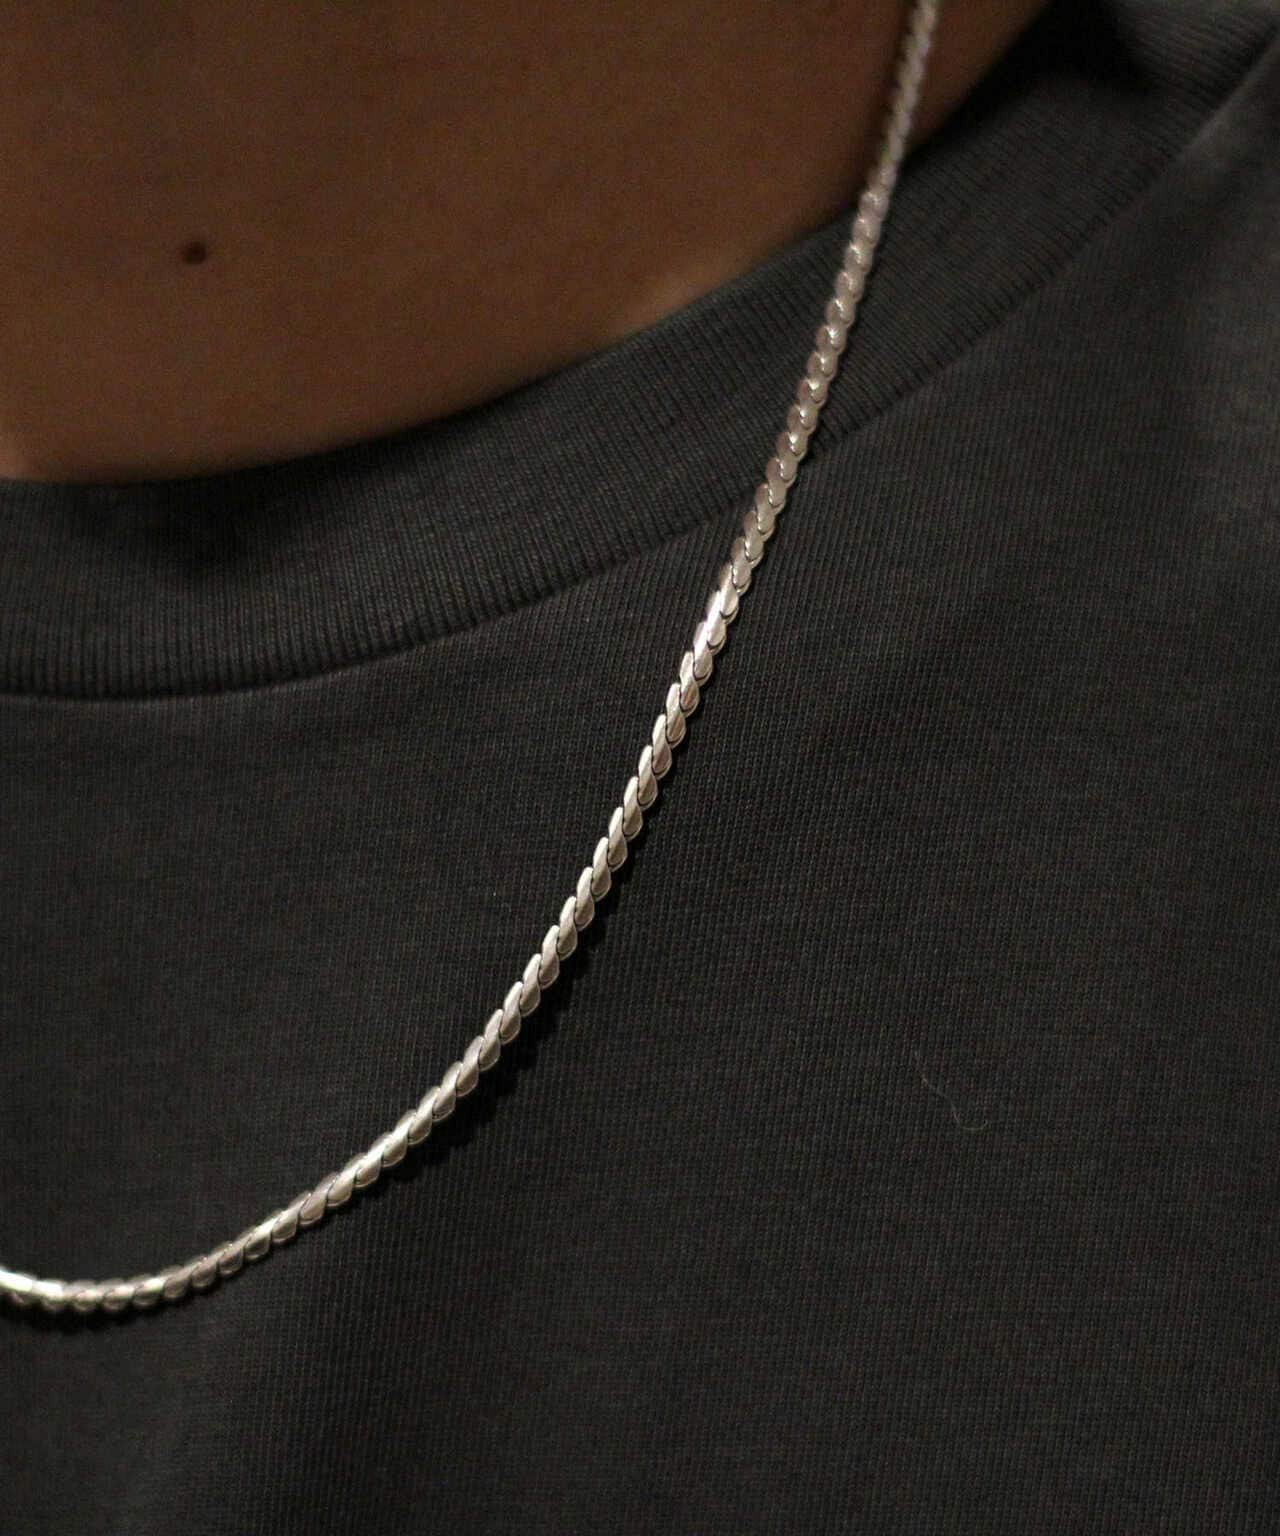 meian/メイアン/STERLING SILVER PYTHON TAIL CHAIN NECKLACE/パイソン 